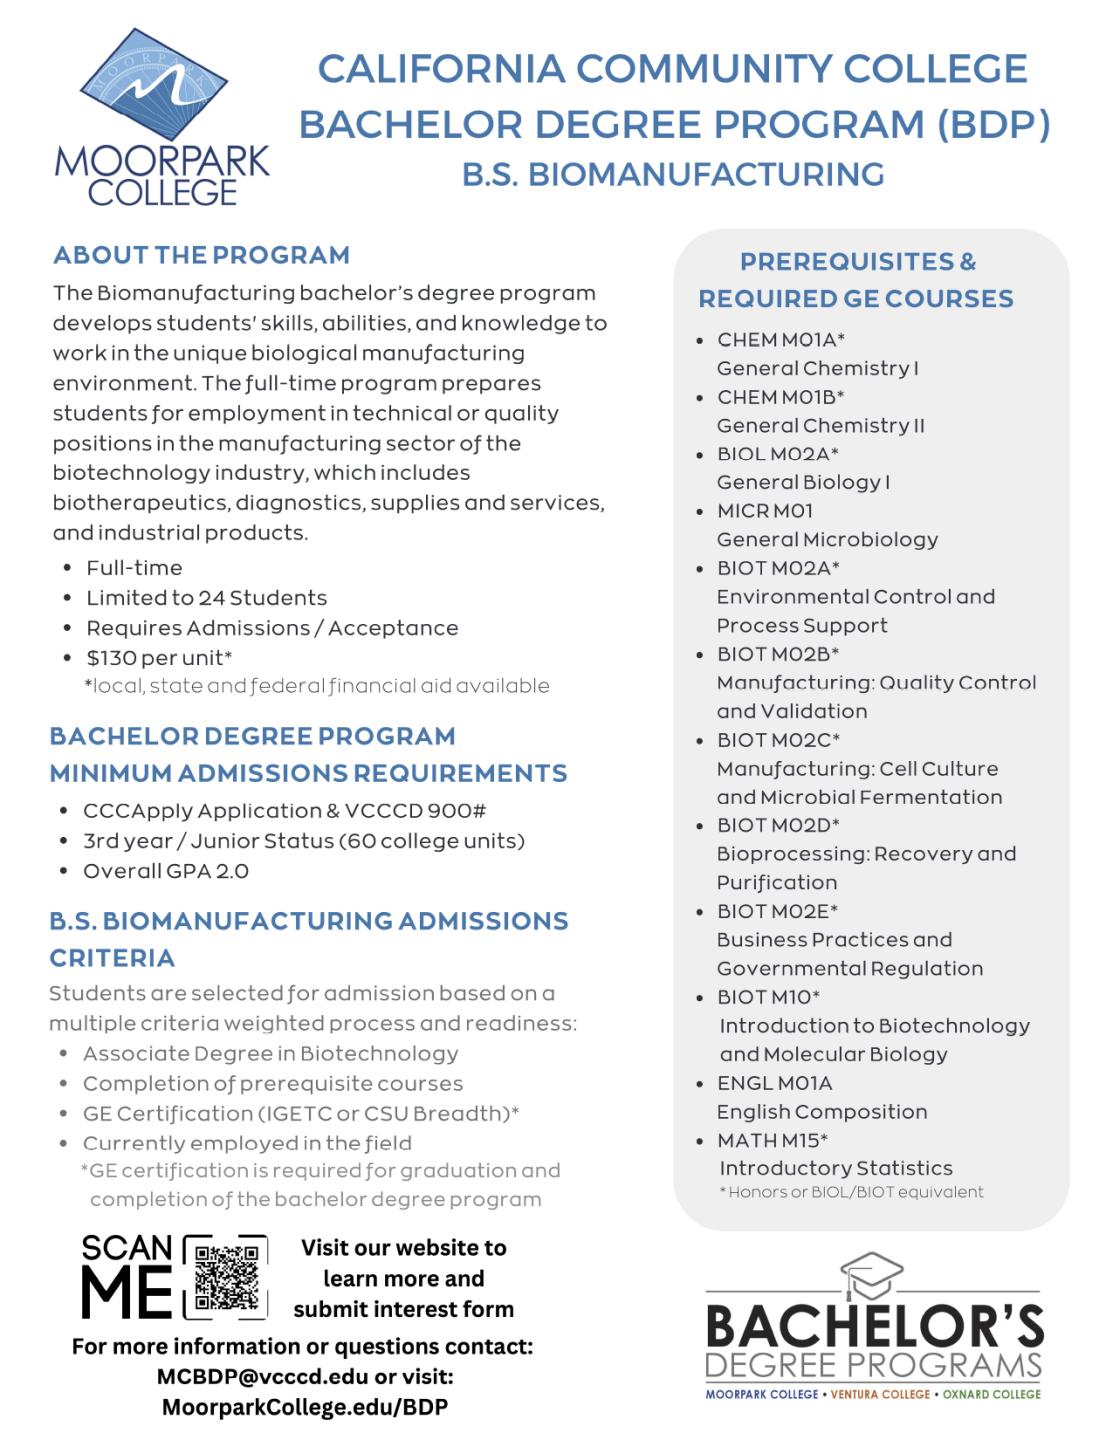 BDP BS Biomanufacturing Program Overview Flyer